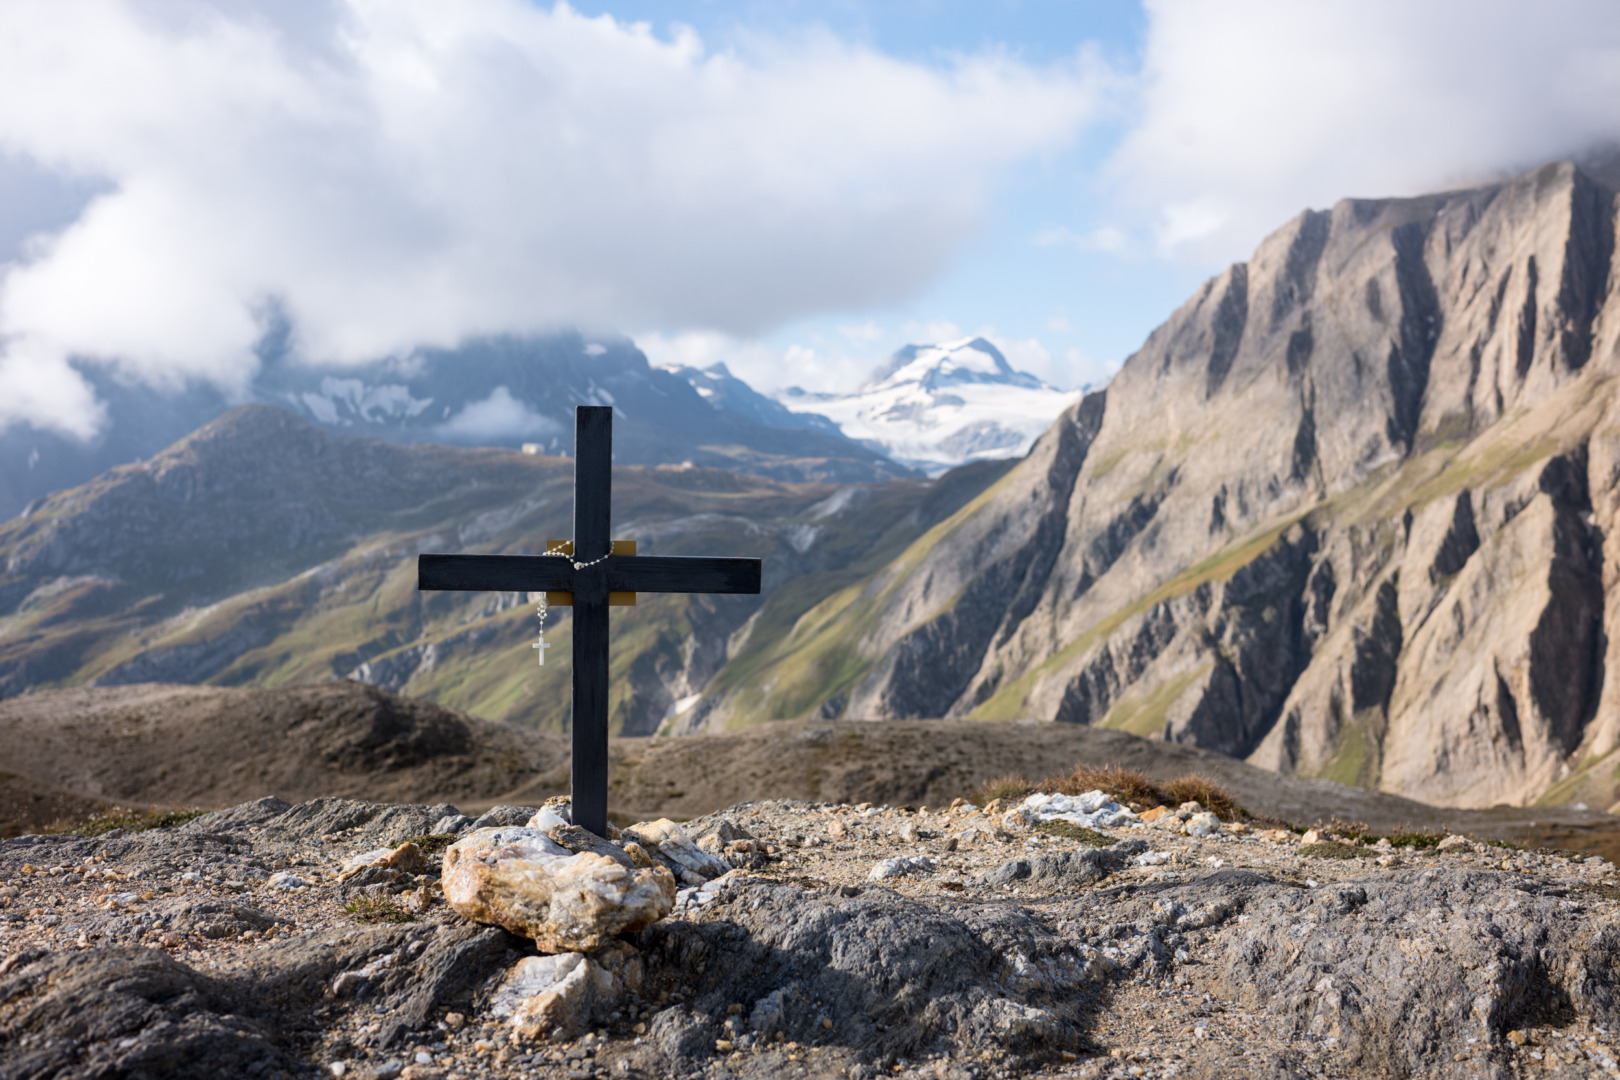 This photo is interesting, and not only for bokeh studies. The Cross marks the place next to the Italian-Swiss border on the Griespass where three 15-year-old boy scouts died in a snowstorm in December 1953. Zeiss Distagon 35/1.4 on Leica M10. 1/1500 sec, f/2.4 ca., ISO 200.